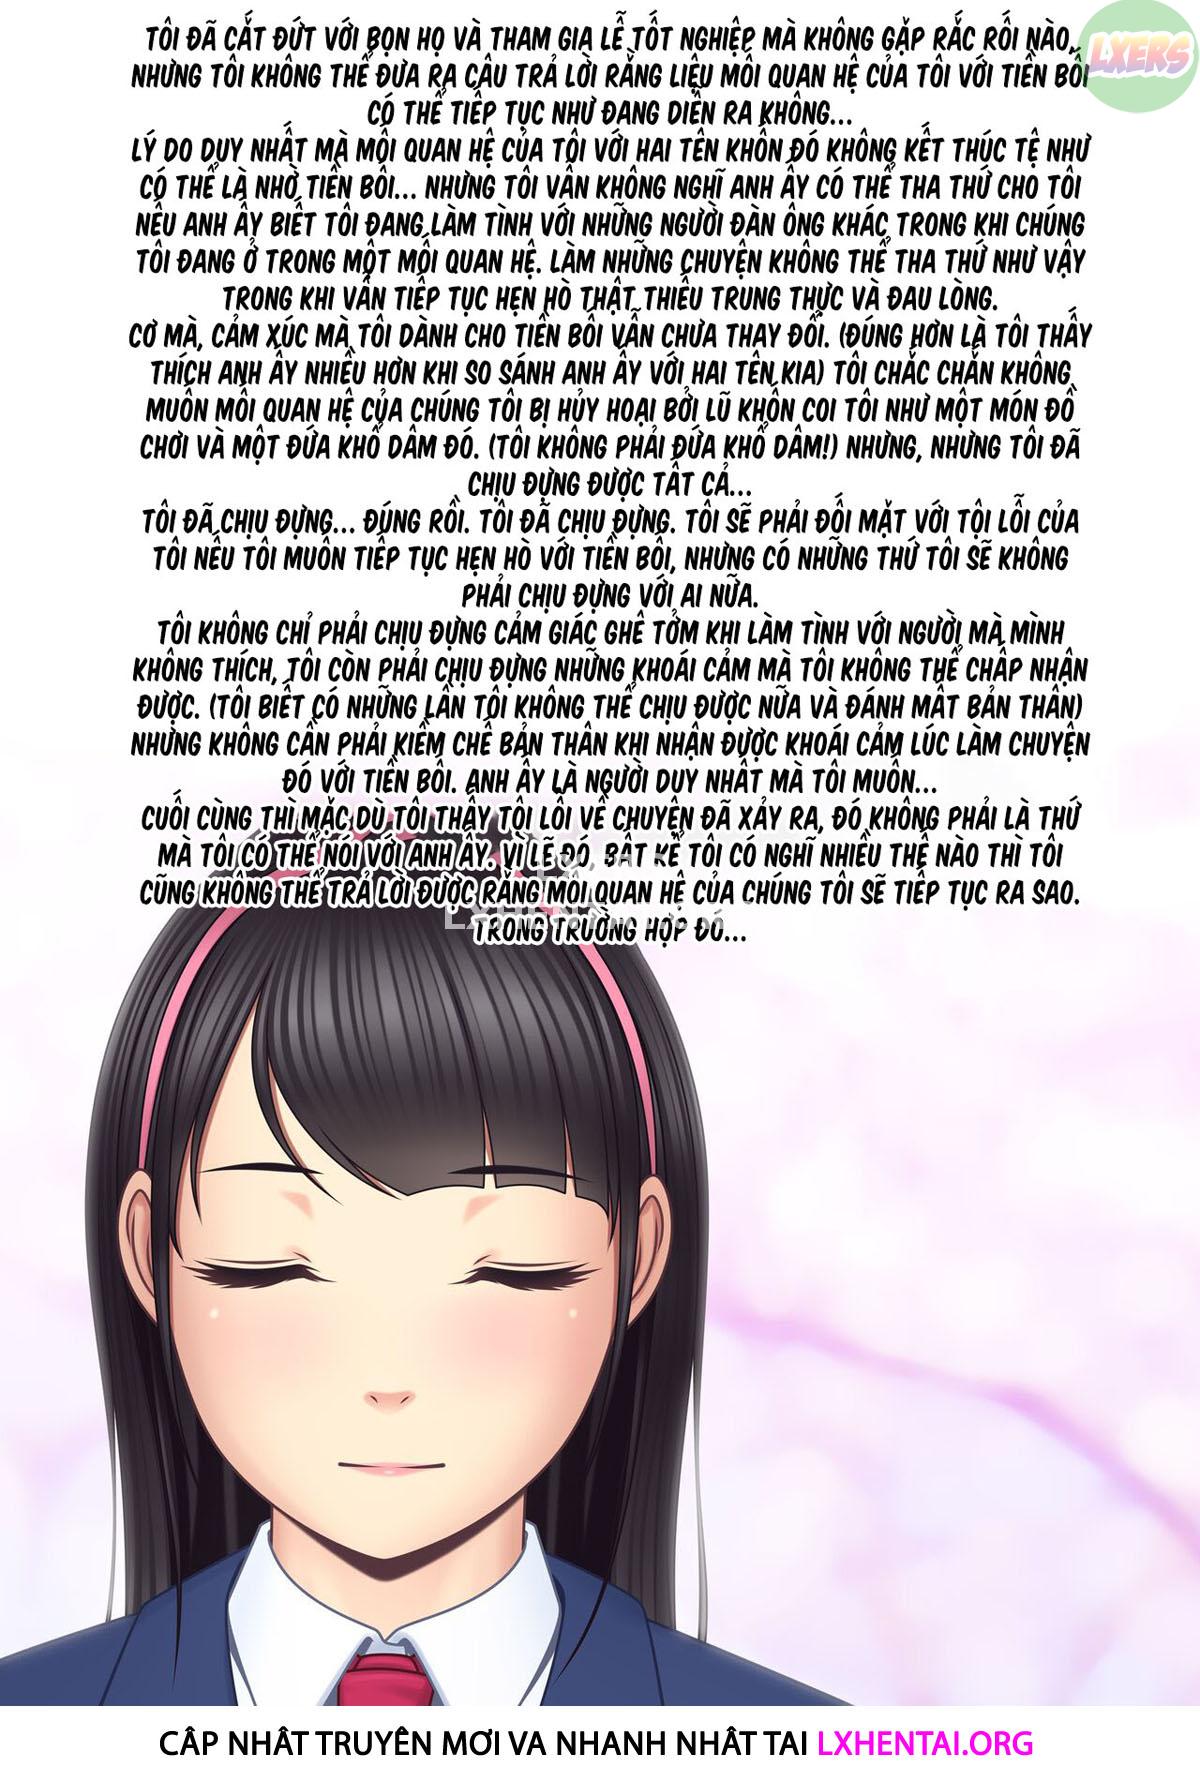 Xem ảnh Pleasure ≠ Boyfriend ~I Can't Believe Guys As Annoying As These Are Making Me Cum - Chapter 3 END - 69 - Hentai24h.Tv